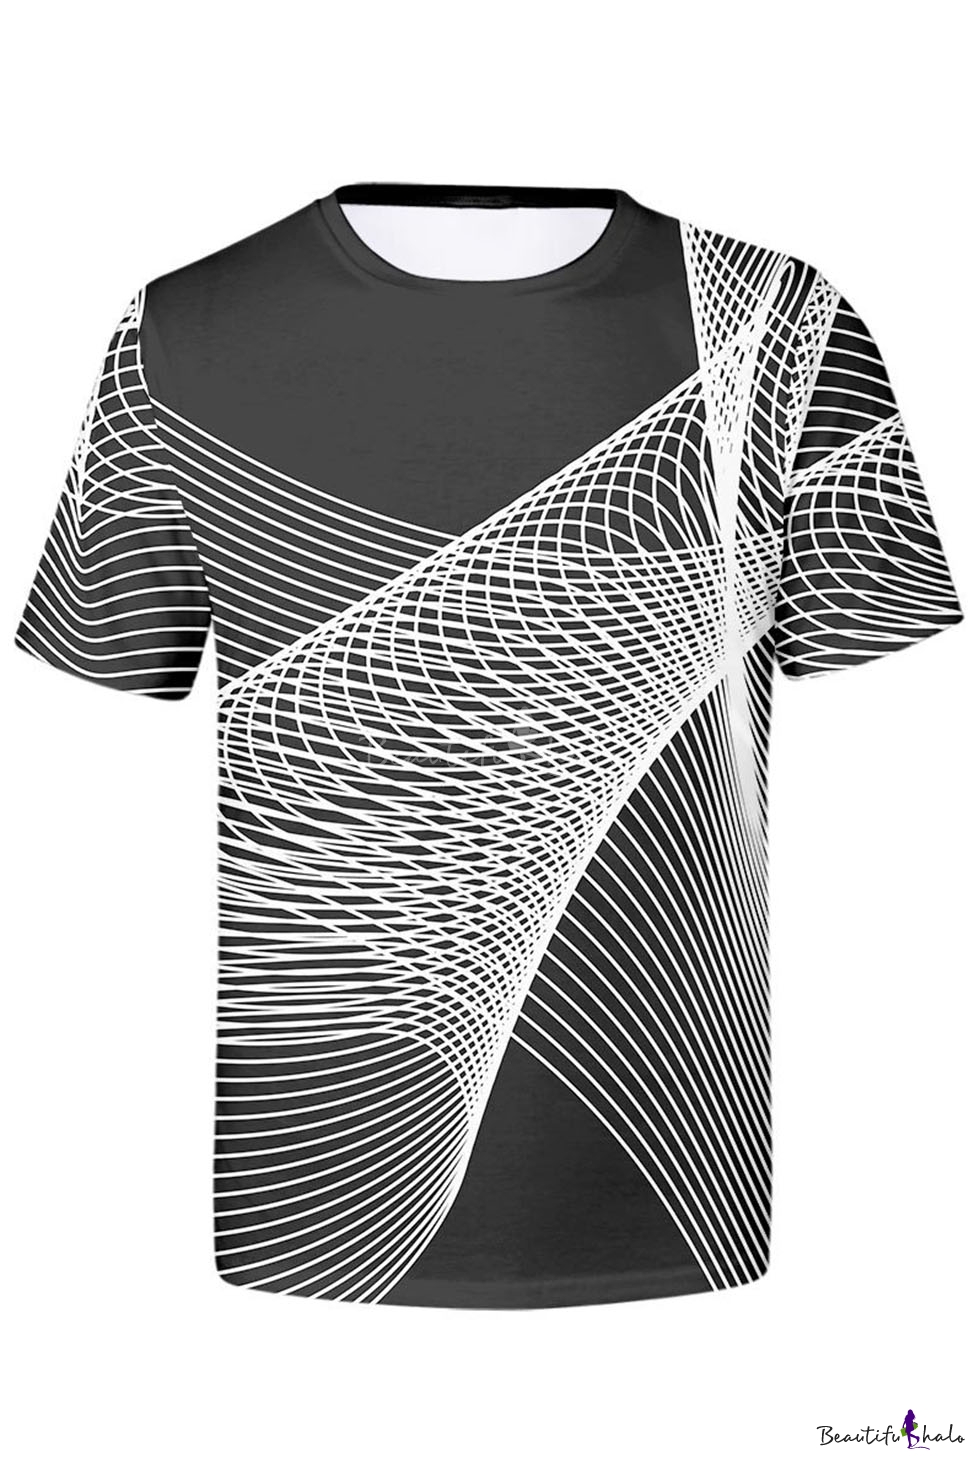 Breathable Raceback T-Shirts for Men Graphic vermers Summer Casual Print for Funny Short Sleeve O-Neck Tops 